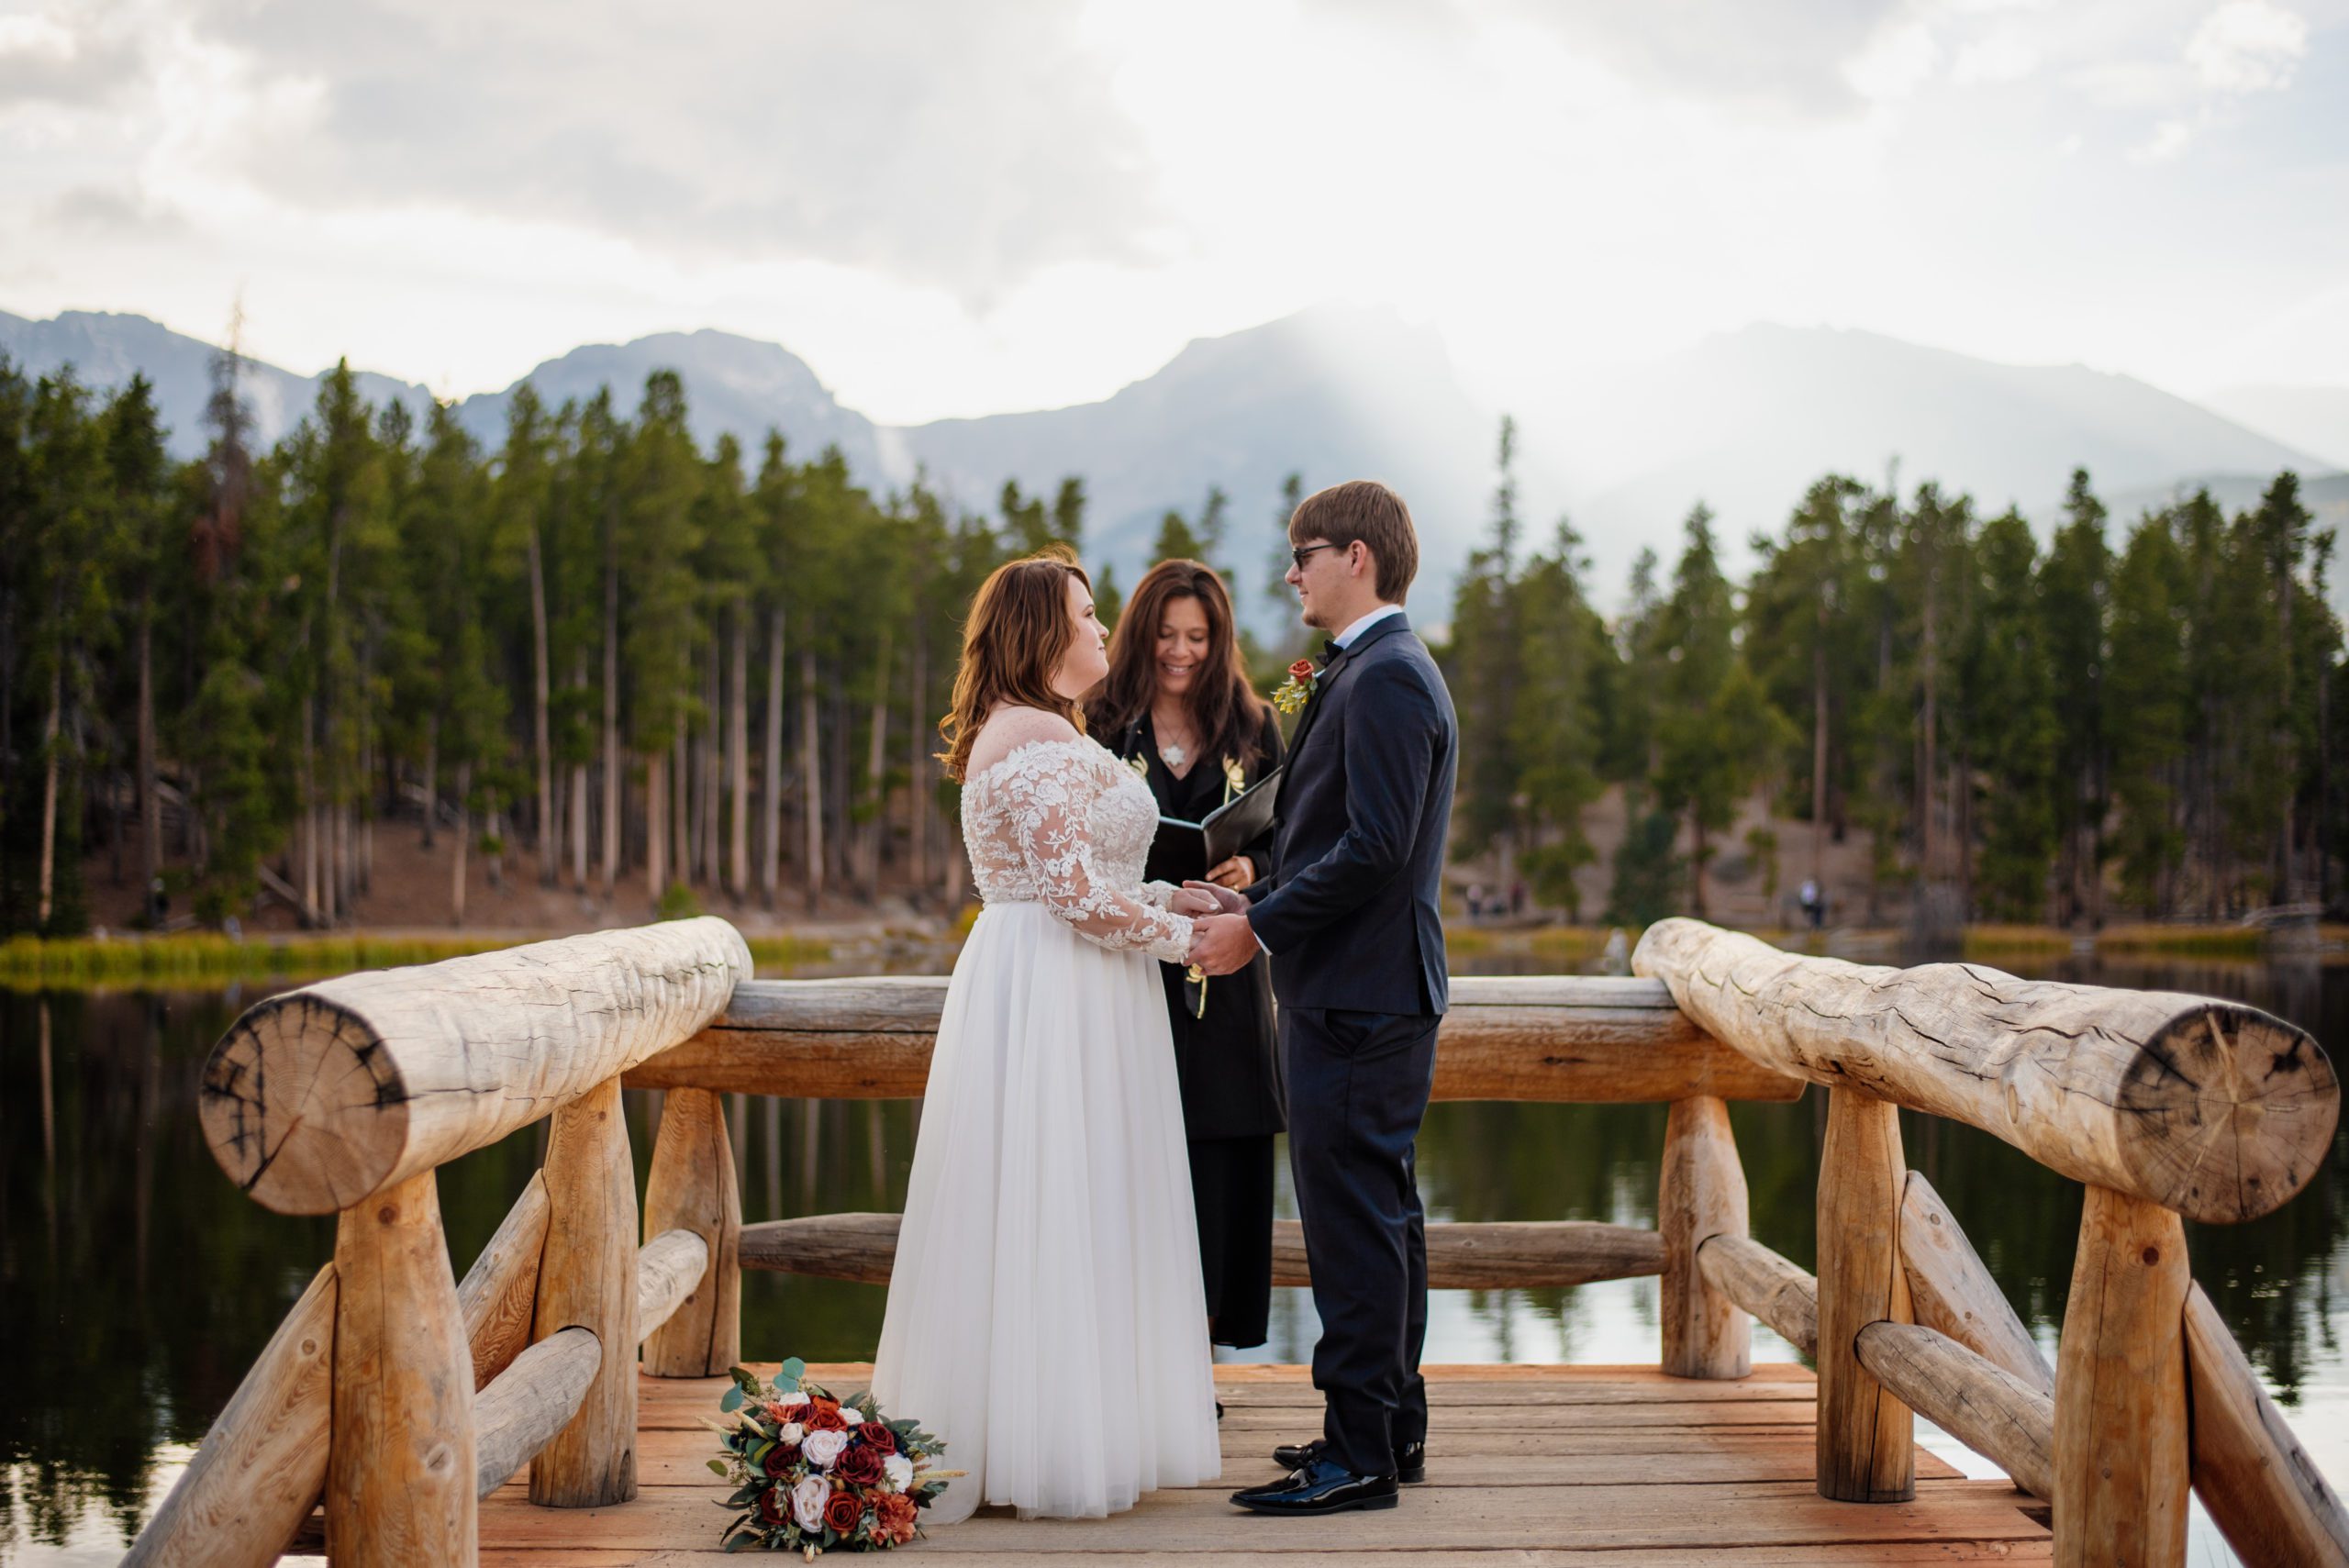 Bride and Groom holding hands during elopement ceremony at Sprague Lake - RMNP